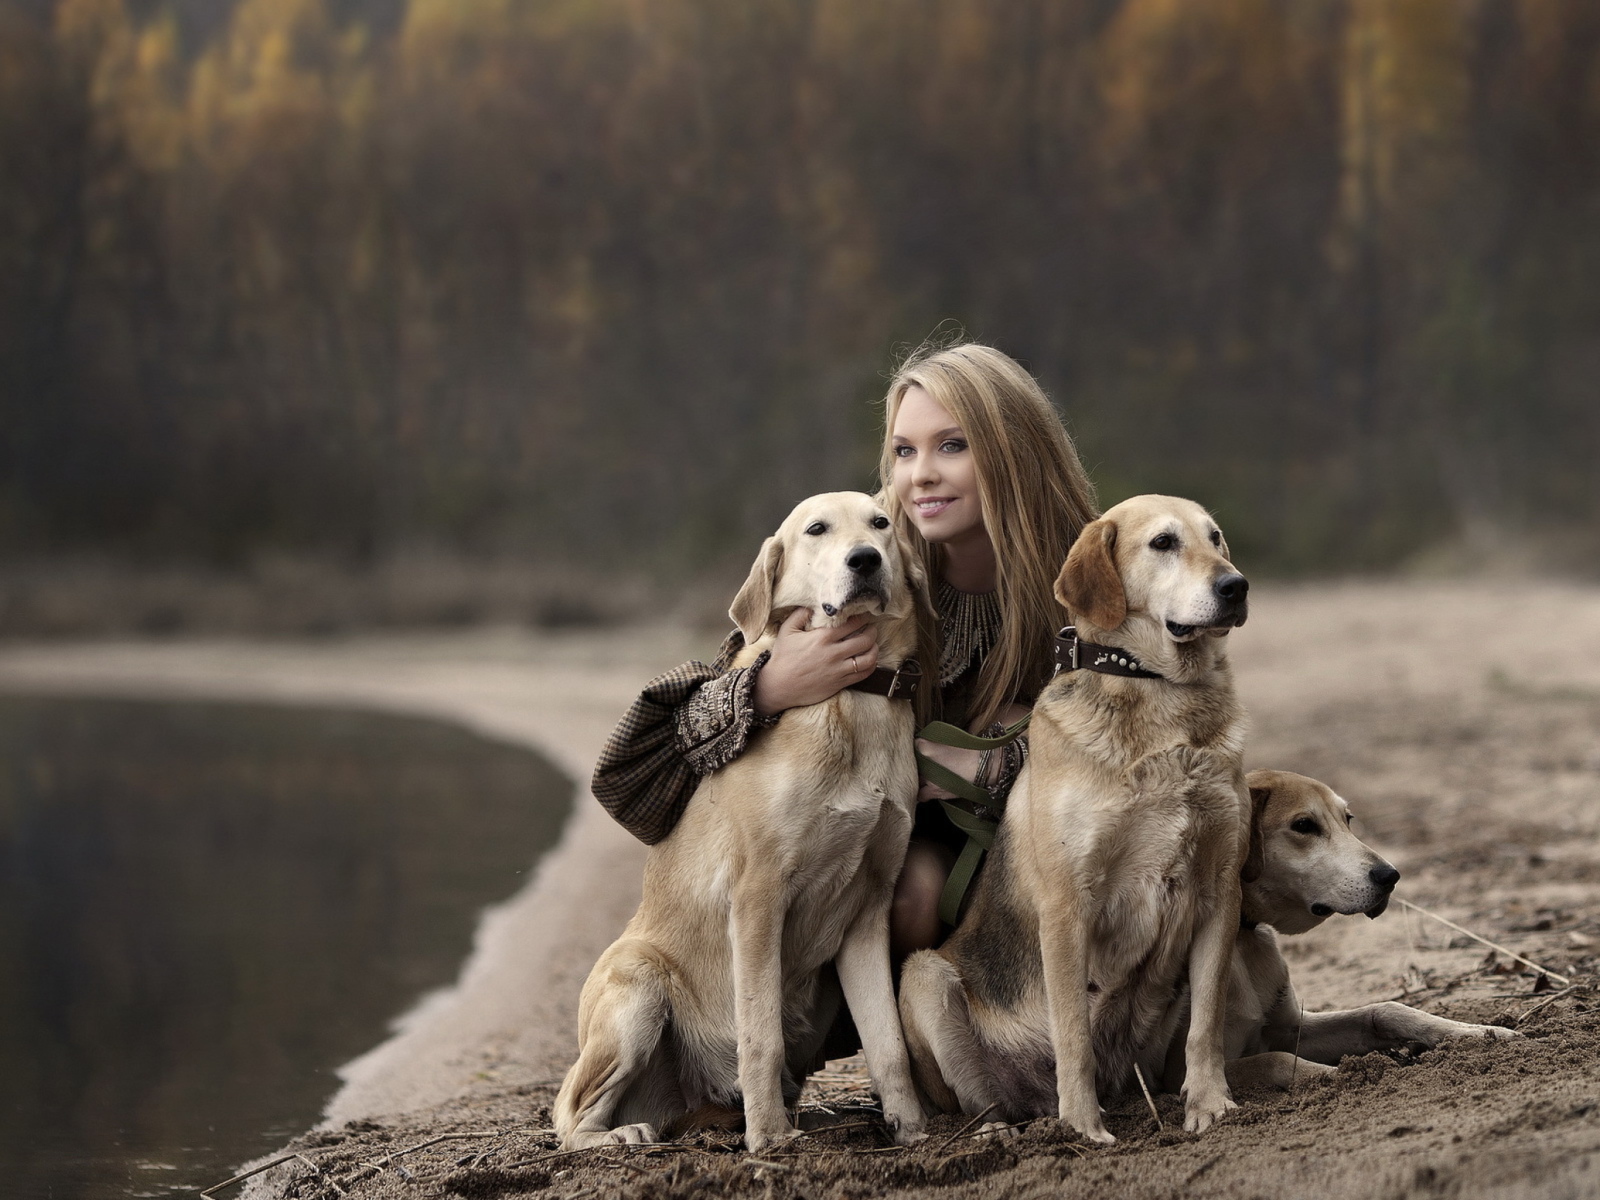 Girl With Dogs wallpaper 1600x1200